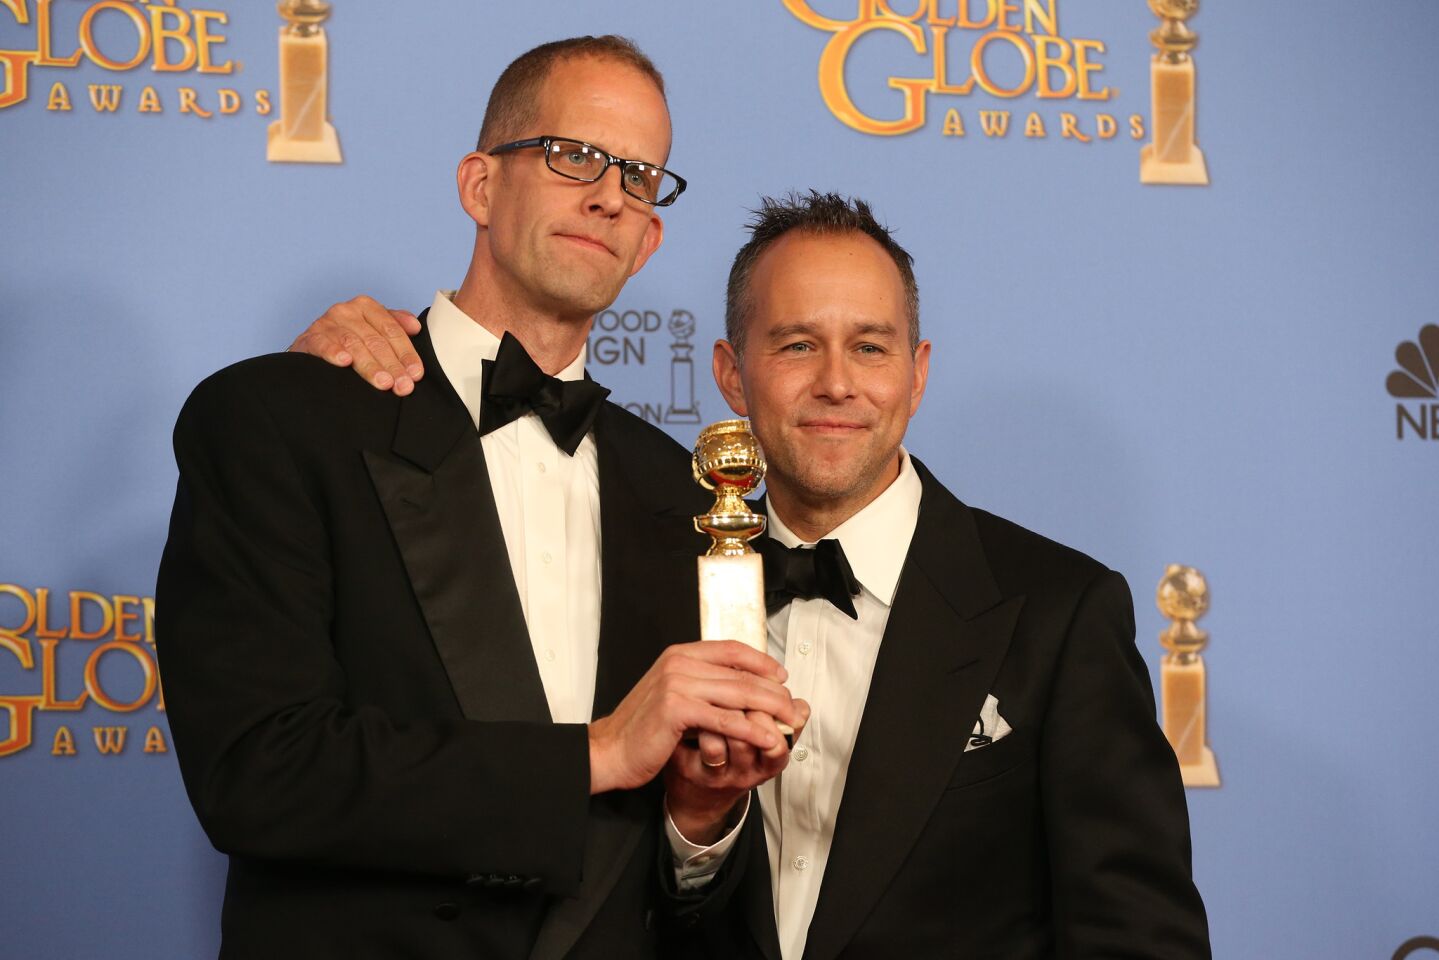 Pete Docter, left, and Jonas Rivera, winners of the best animated feature film for "Inside Out."